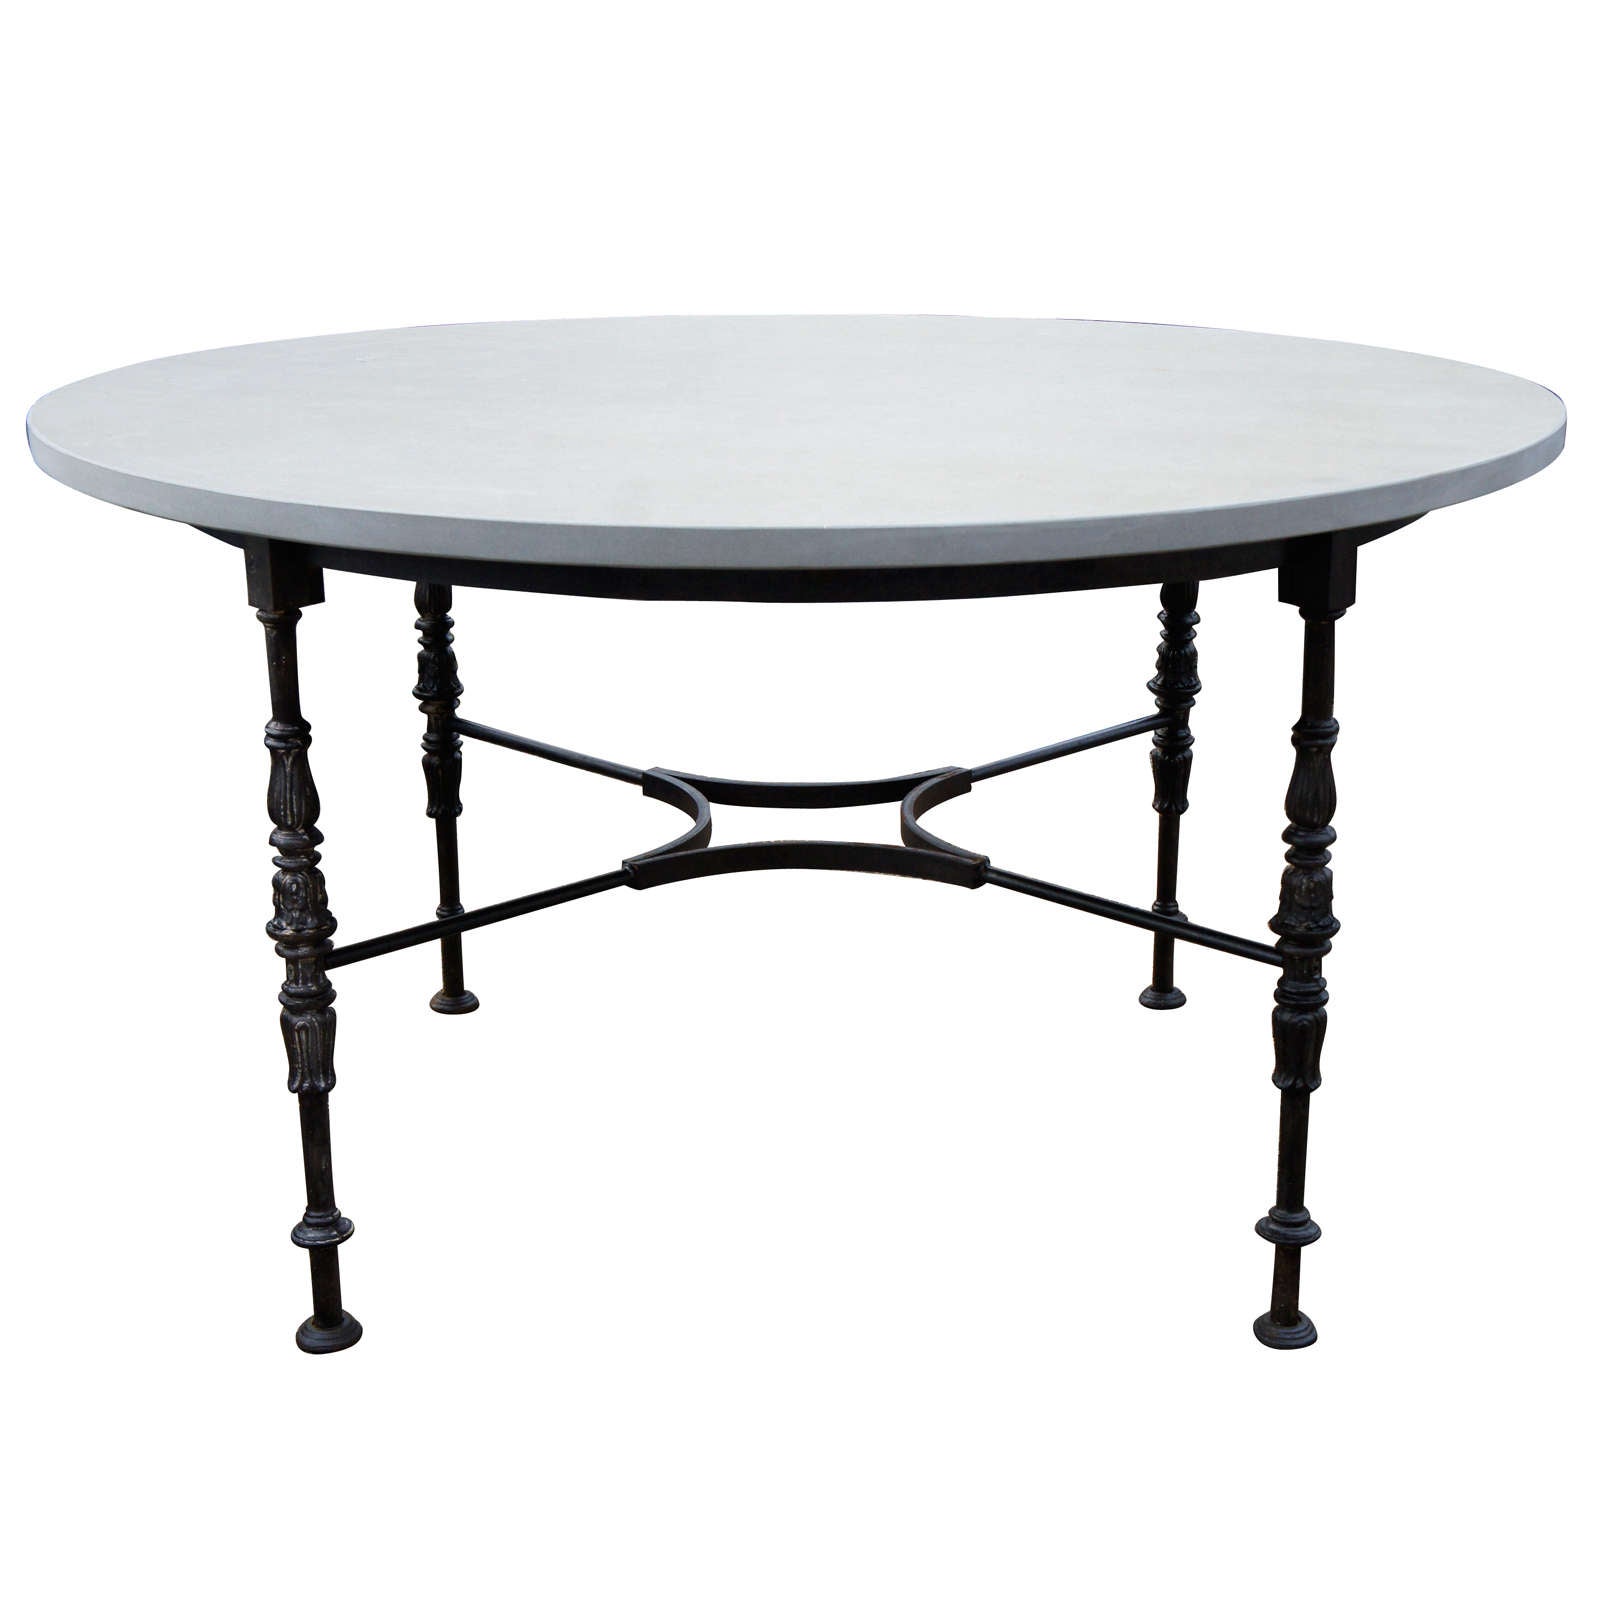 Round Metal Garden Table with Stone Top